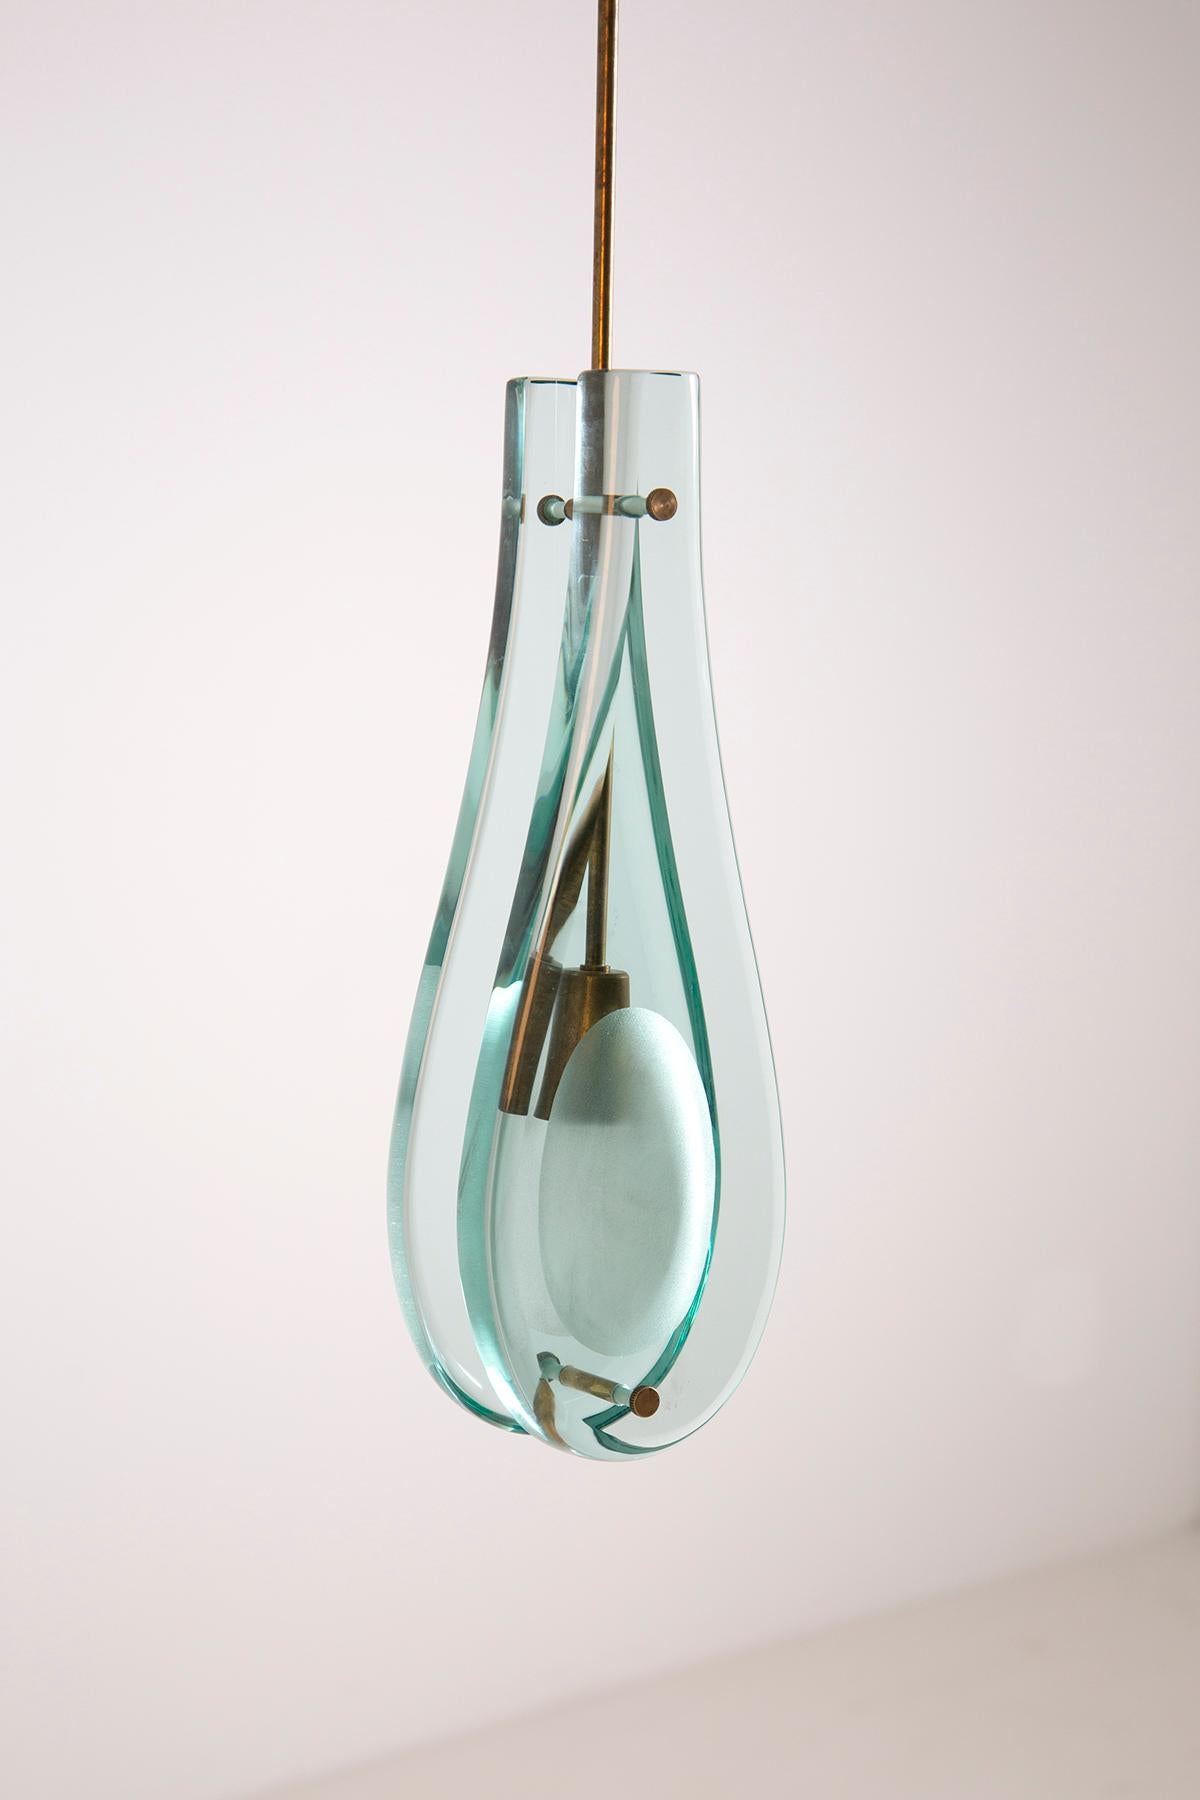 Rare pair of pendant lamps designed by Max Ingrand and produced by Fontana Arte, Italy 1962. Model No. 2259. These lamps have a brass structure and blue glass shades. Very thick glass typical of Fontana Arte. The lamps give a very nice warm light